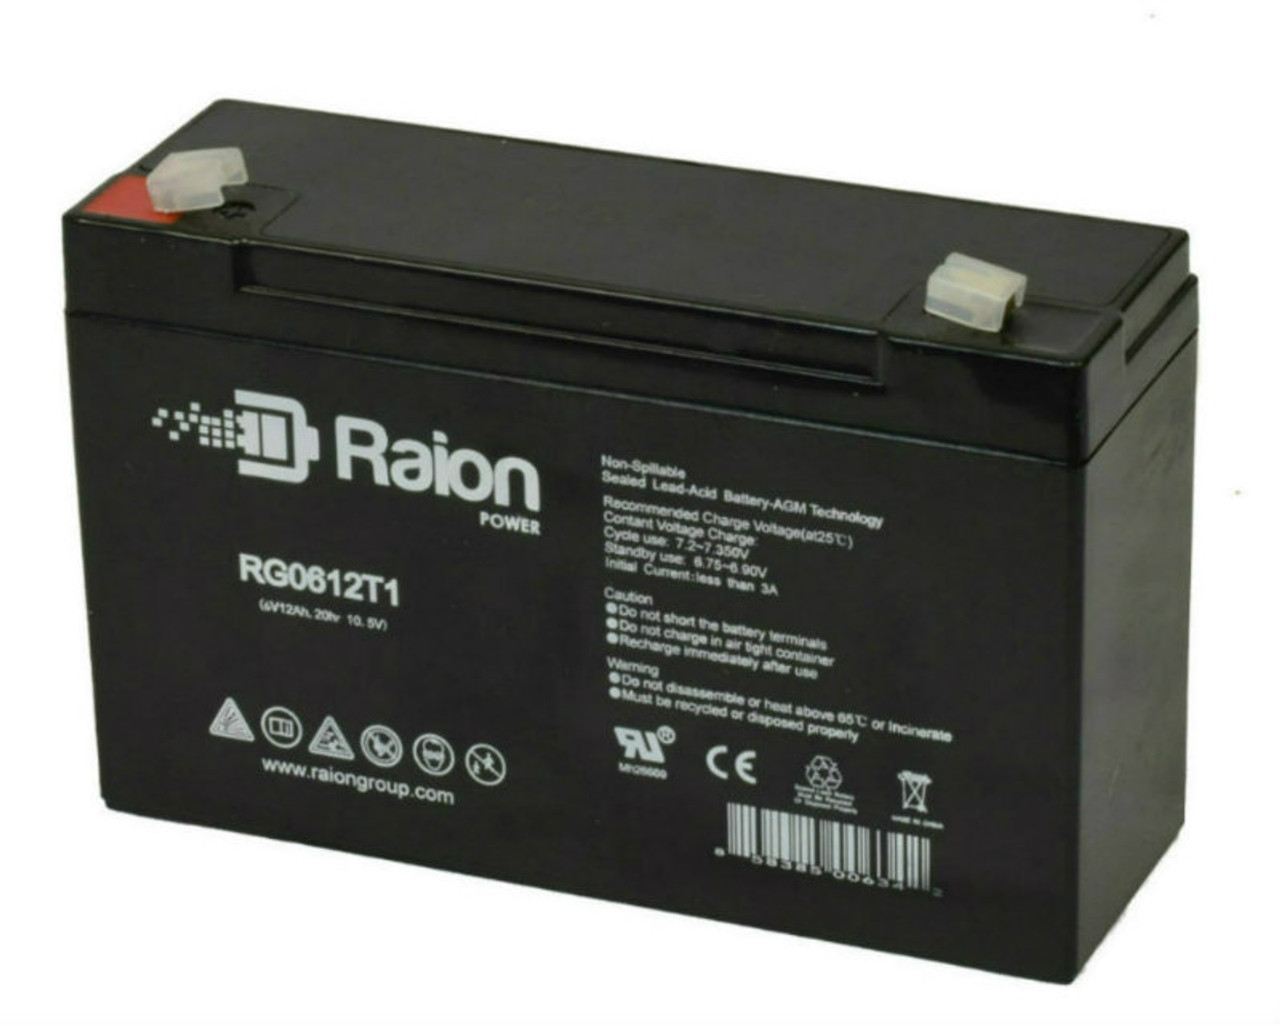 Raion Power RG06120T1 Replacement Battery for Chilwee 3-FM-10